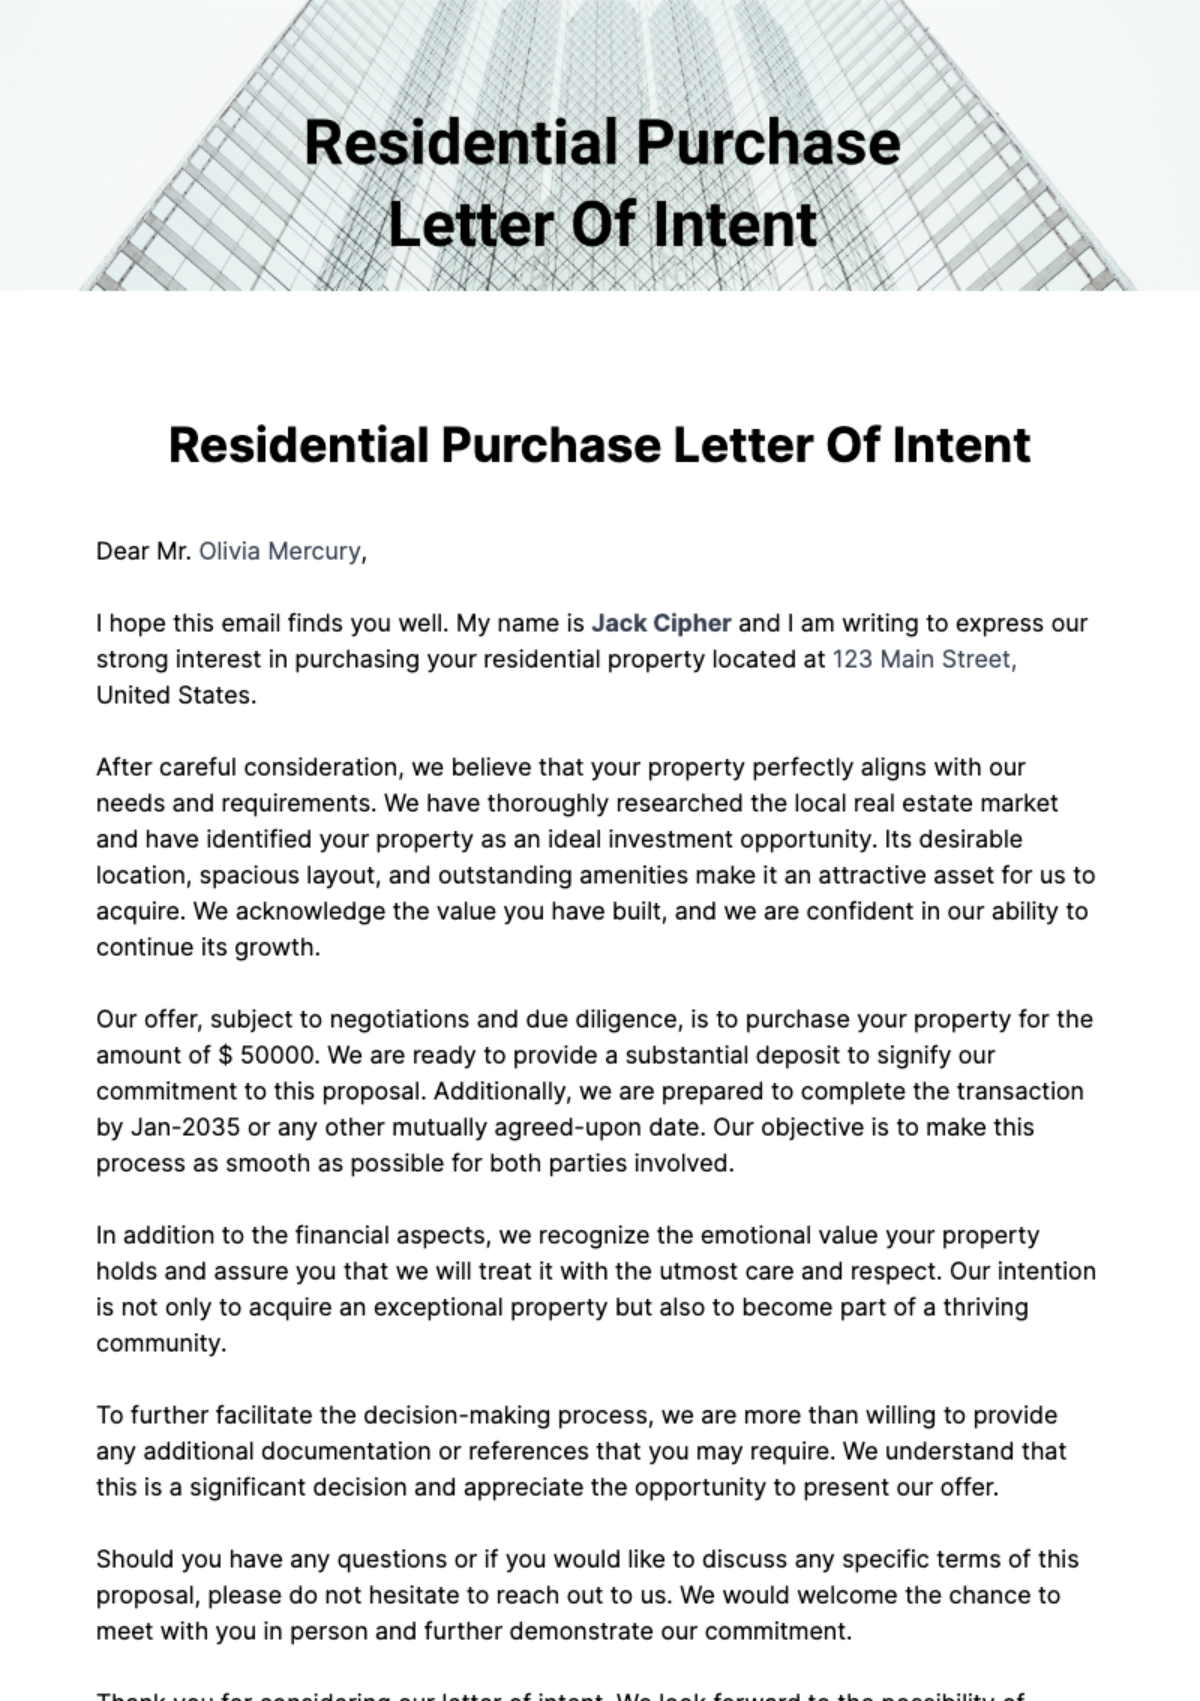 Residential Purchase Letter Of Intent Template